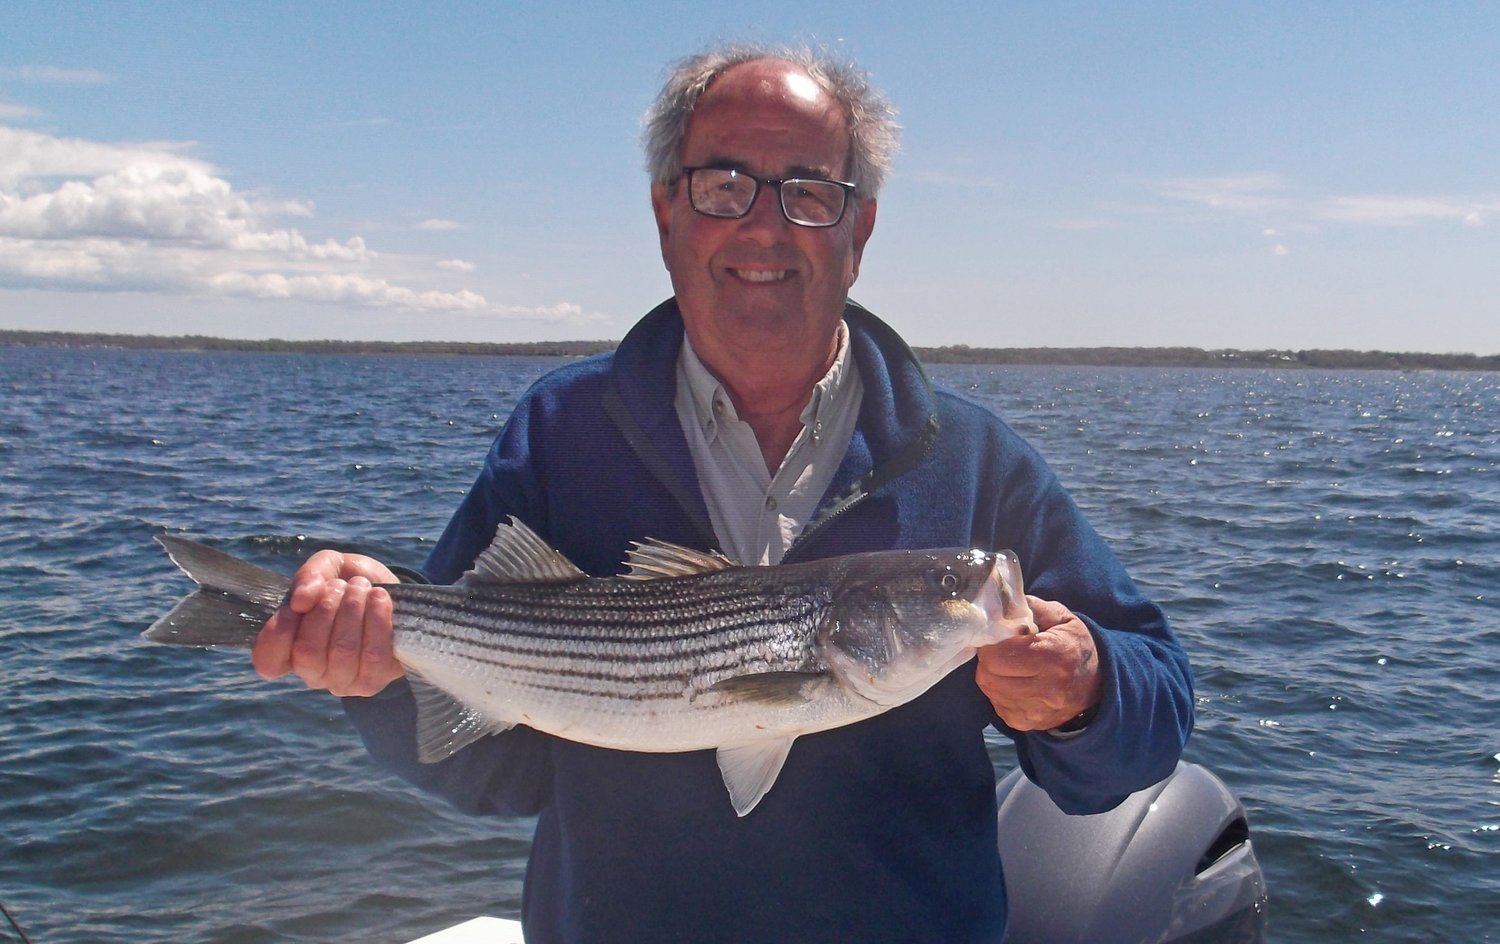 School striped bass: Fred DeFinis of Middletown with one of the many striped bass that he and his fishing partner caught between Colt State Park and Prudence Island last week.